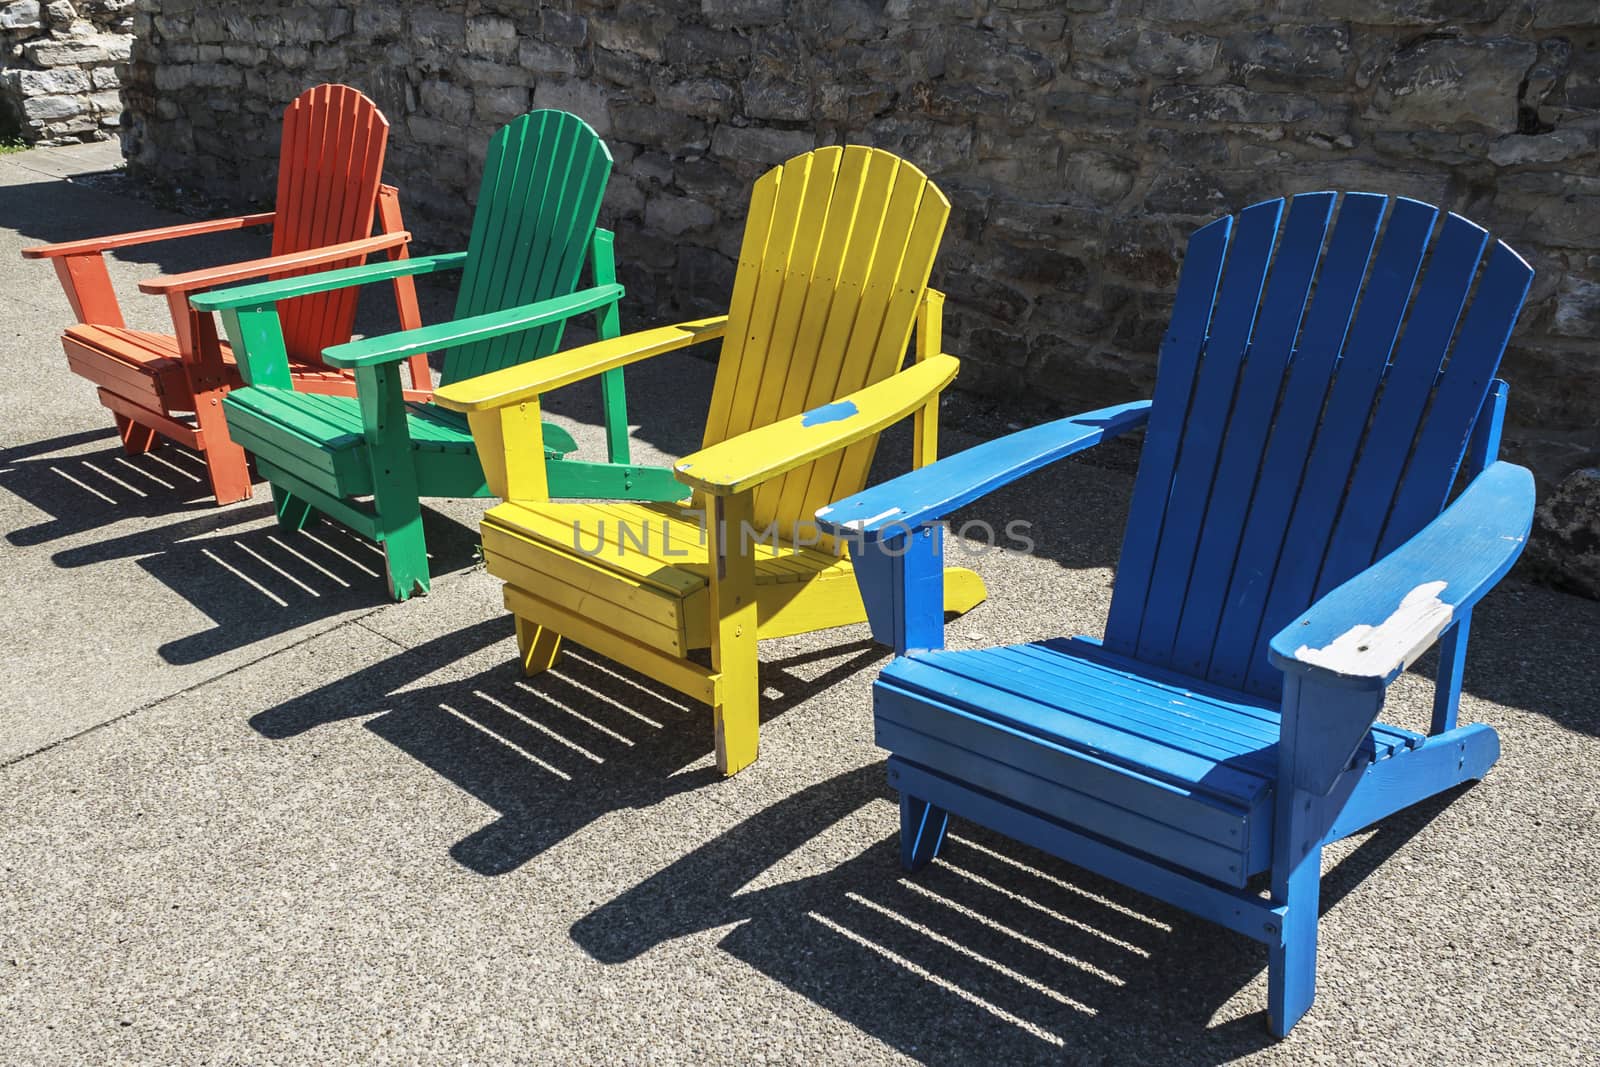 Row of colored adirondack chairs at high noon.